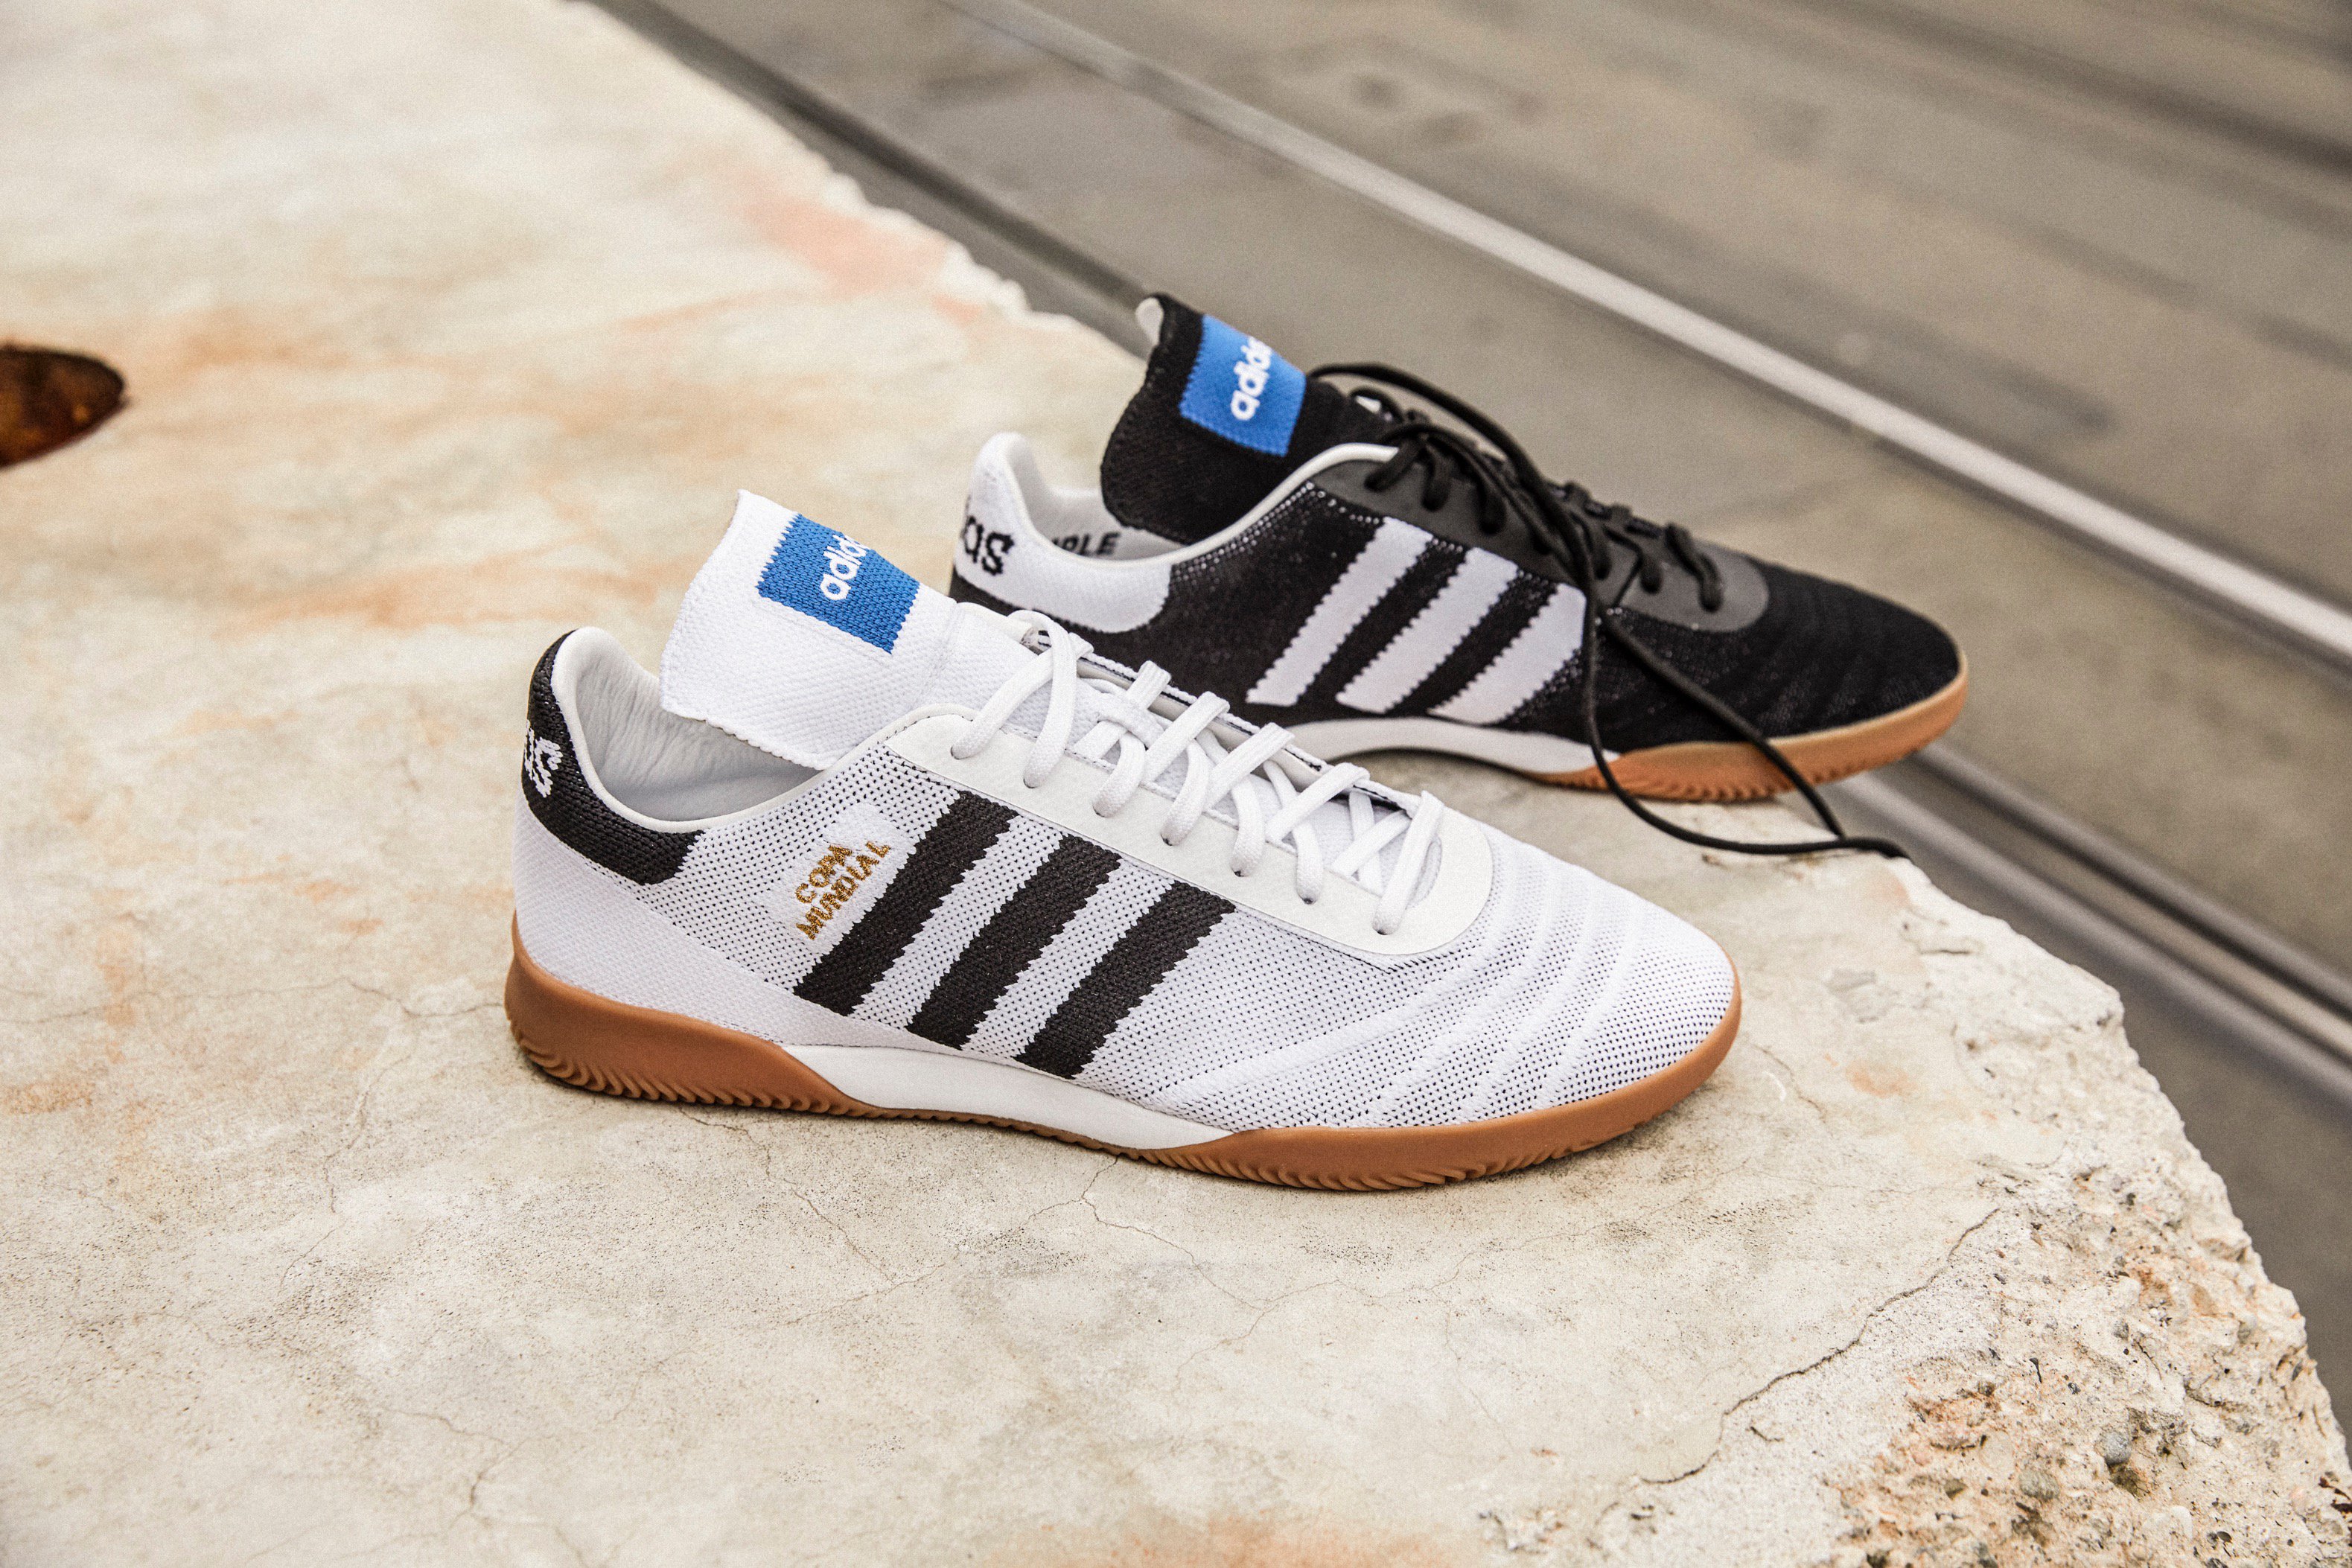 clase Oriental palanca Pro:Direct Soccer on Twitter: "70 years strong. The adidas Copa Mundial  hits the streets with a Limited Edition '70Y' sneaker.  https://t.co/O9RzbeuHAu" / Twitter